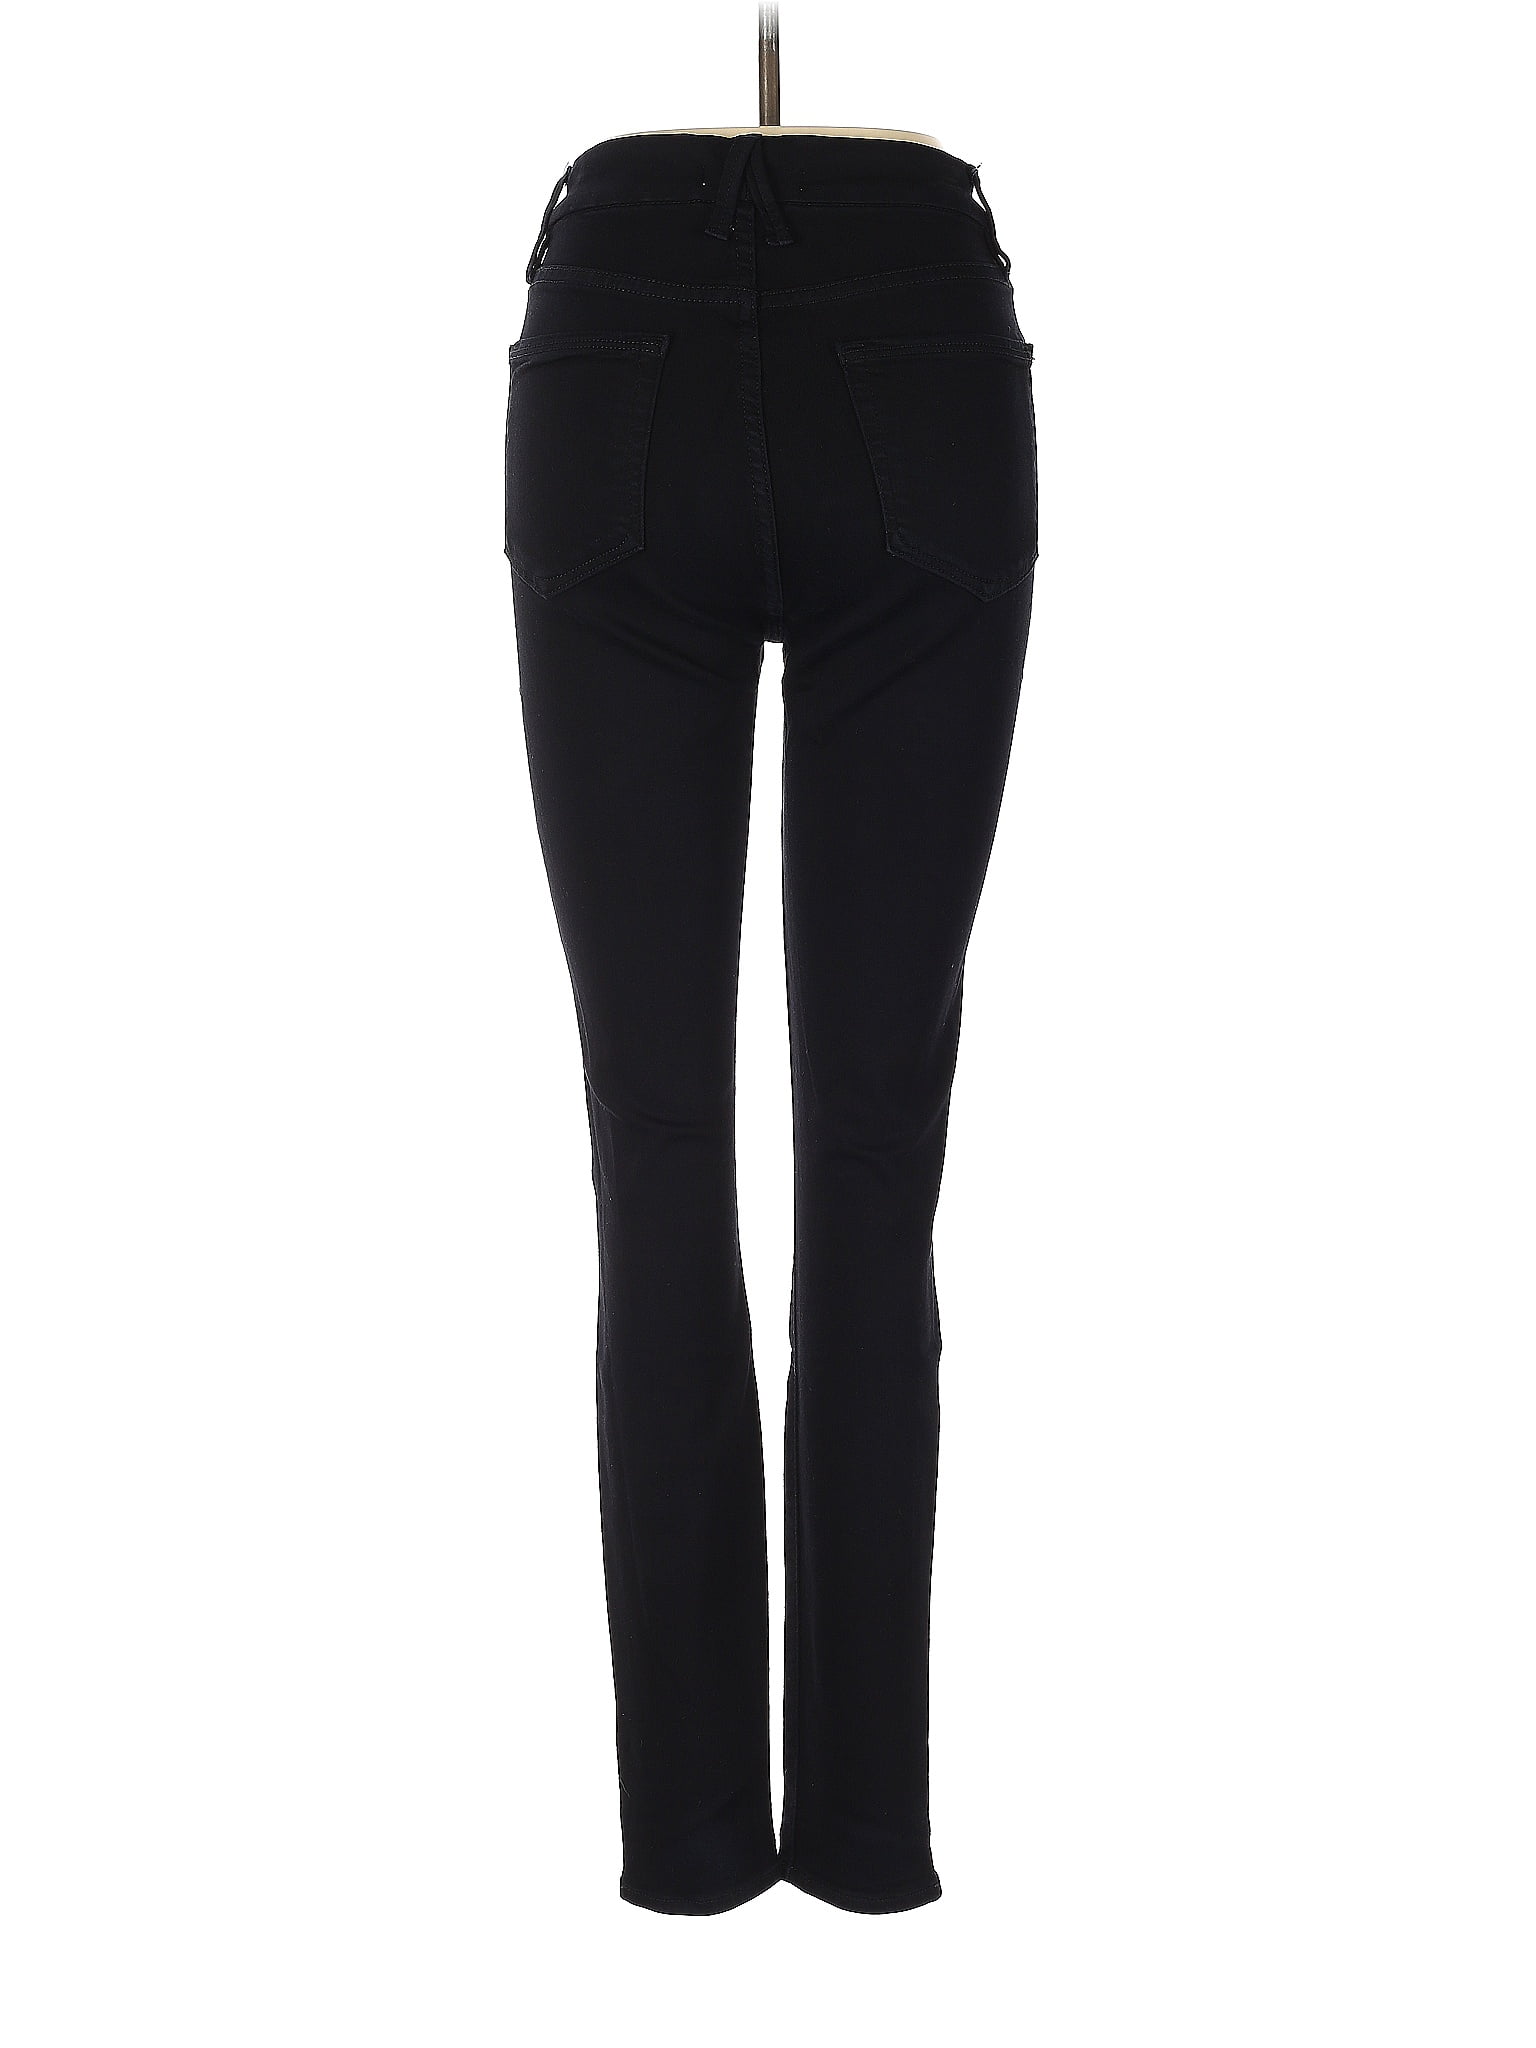 Good American Solid Black Jeans Size 0 - 71% off